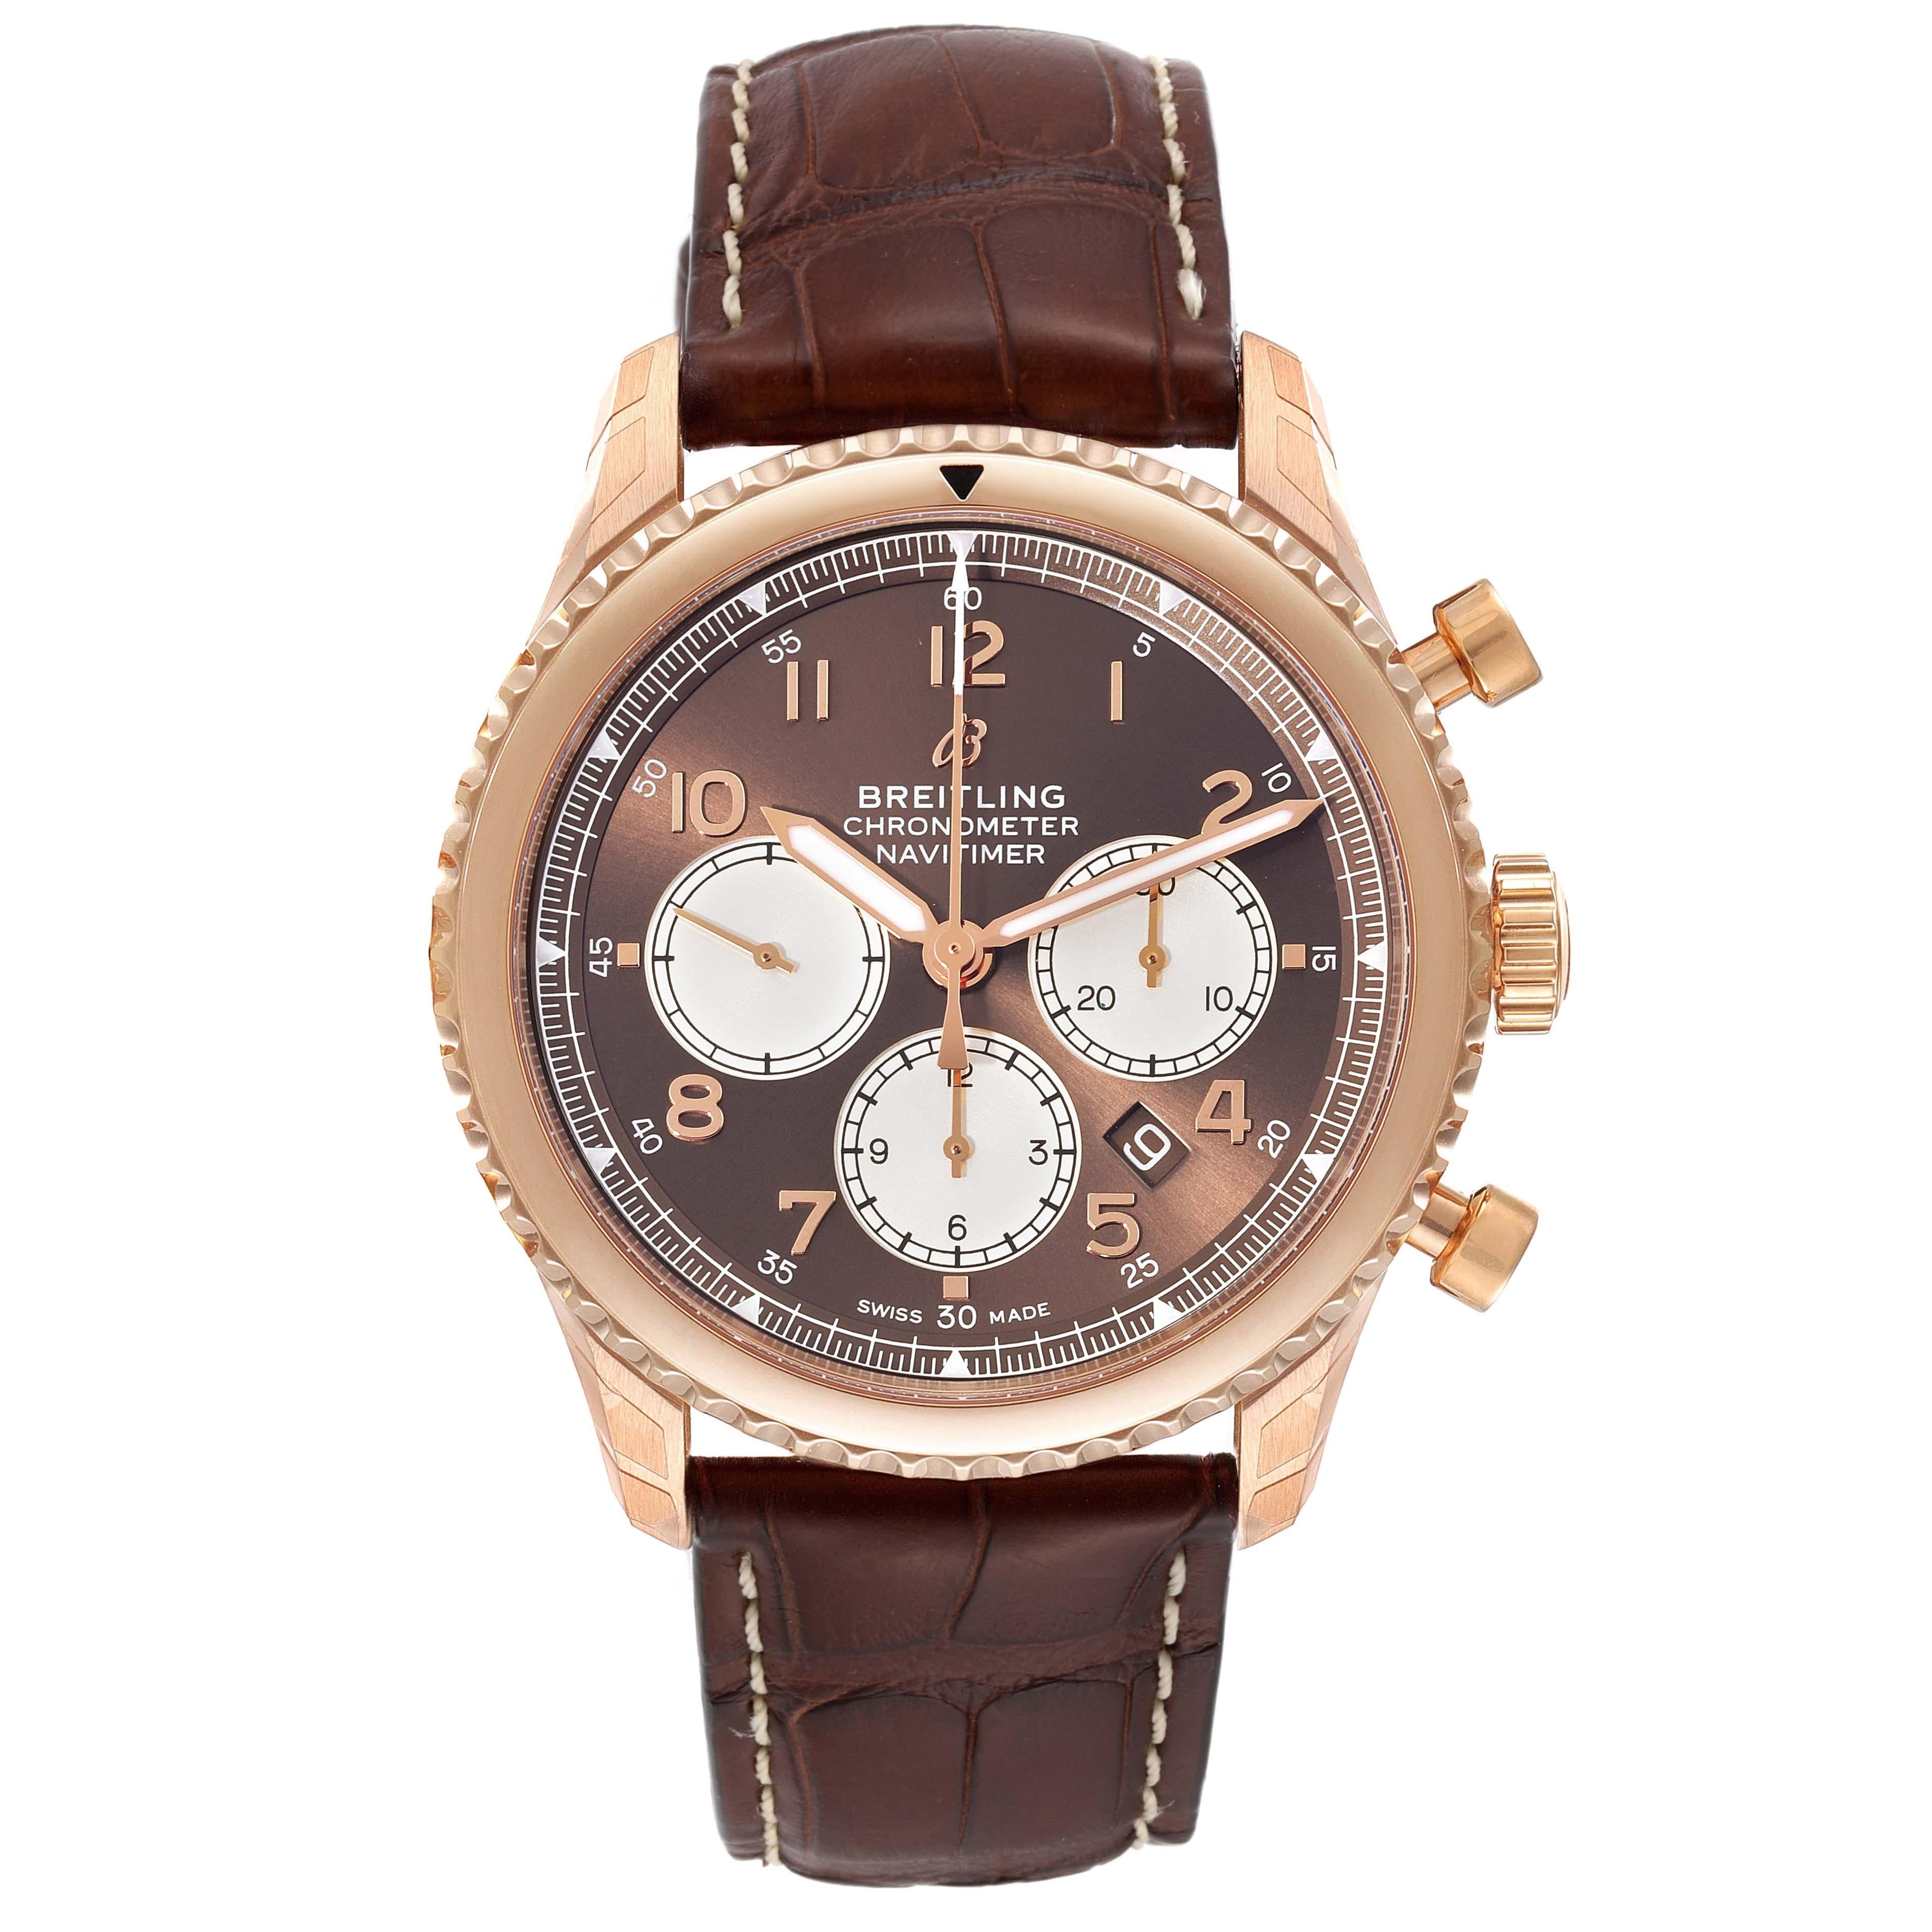 Breitling Navitimer Aviator 8 B01 Rose Gold Mens Watch RB0117 Unworn. Self-winding automatic officially certified chronometer movement. Chronograph function. 18k rose gold case 43.0 mm in diameter. Exhibition transparent sapphire crystal caseback.